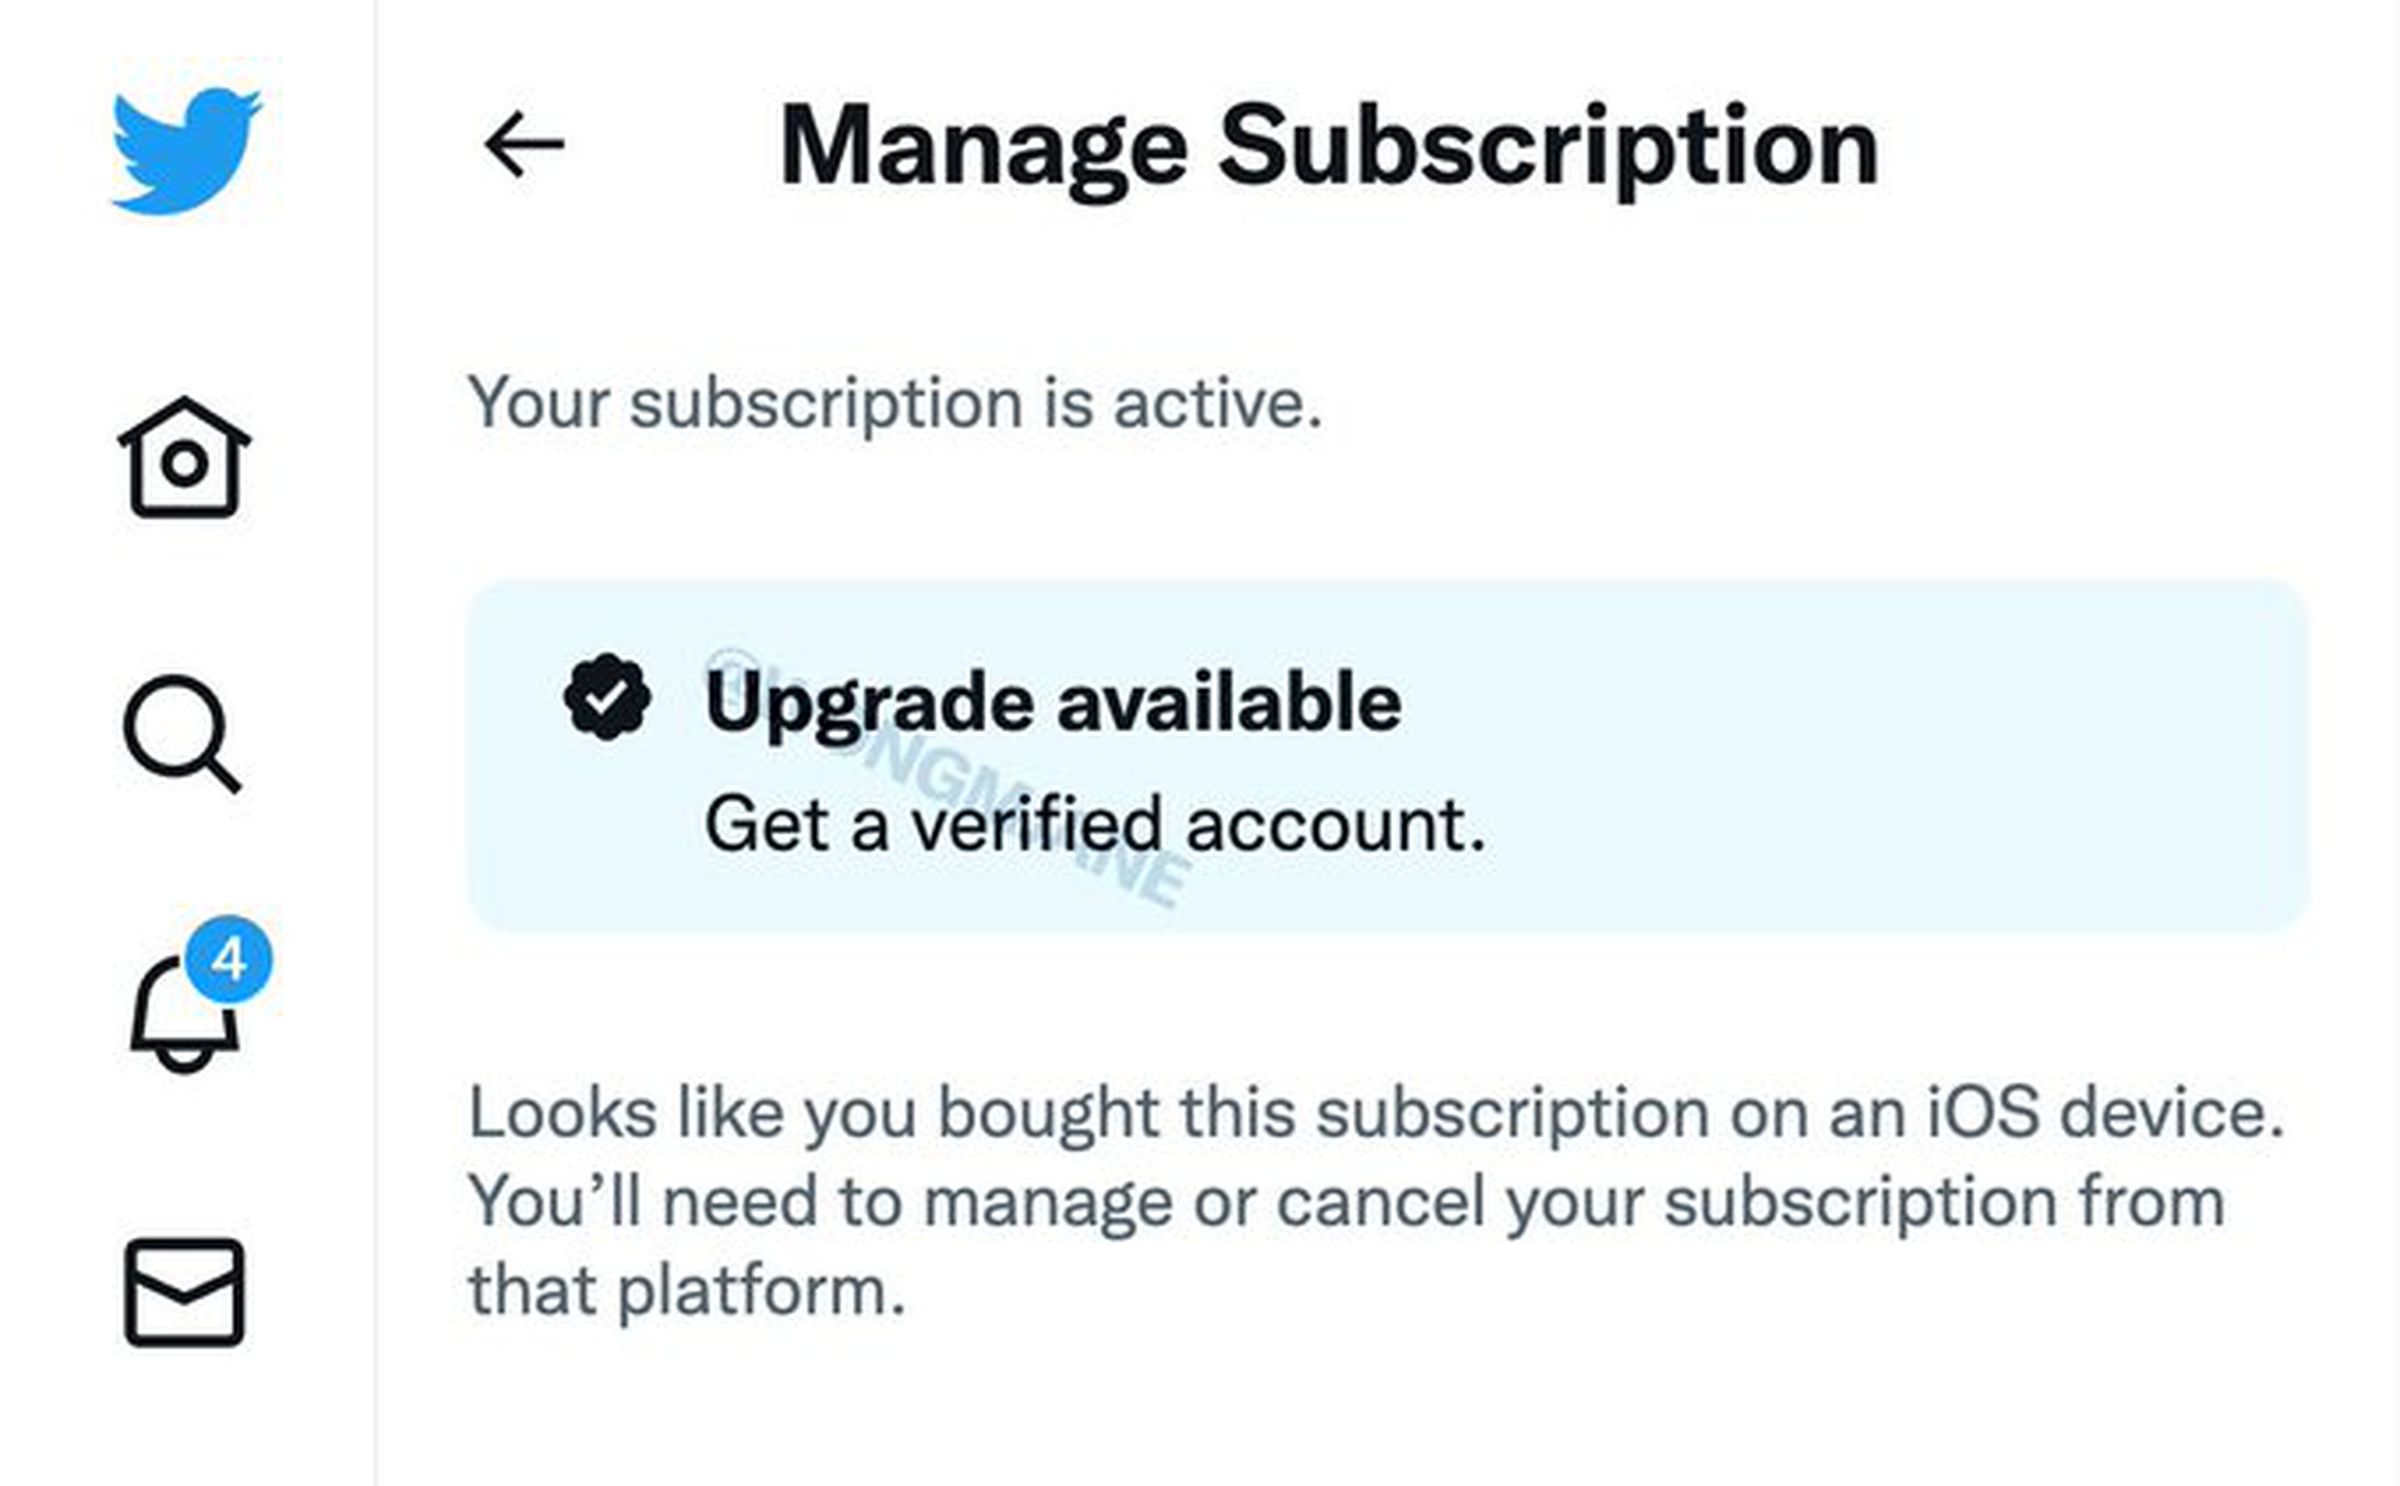 A screengrab of a “Manage Subscription” page in Twitter offering an “Upgrade available” to get a verified account.